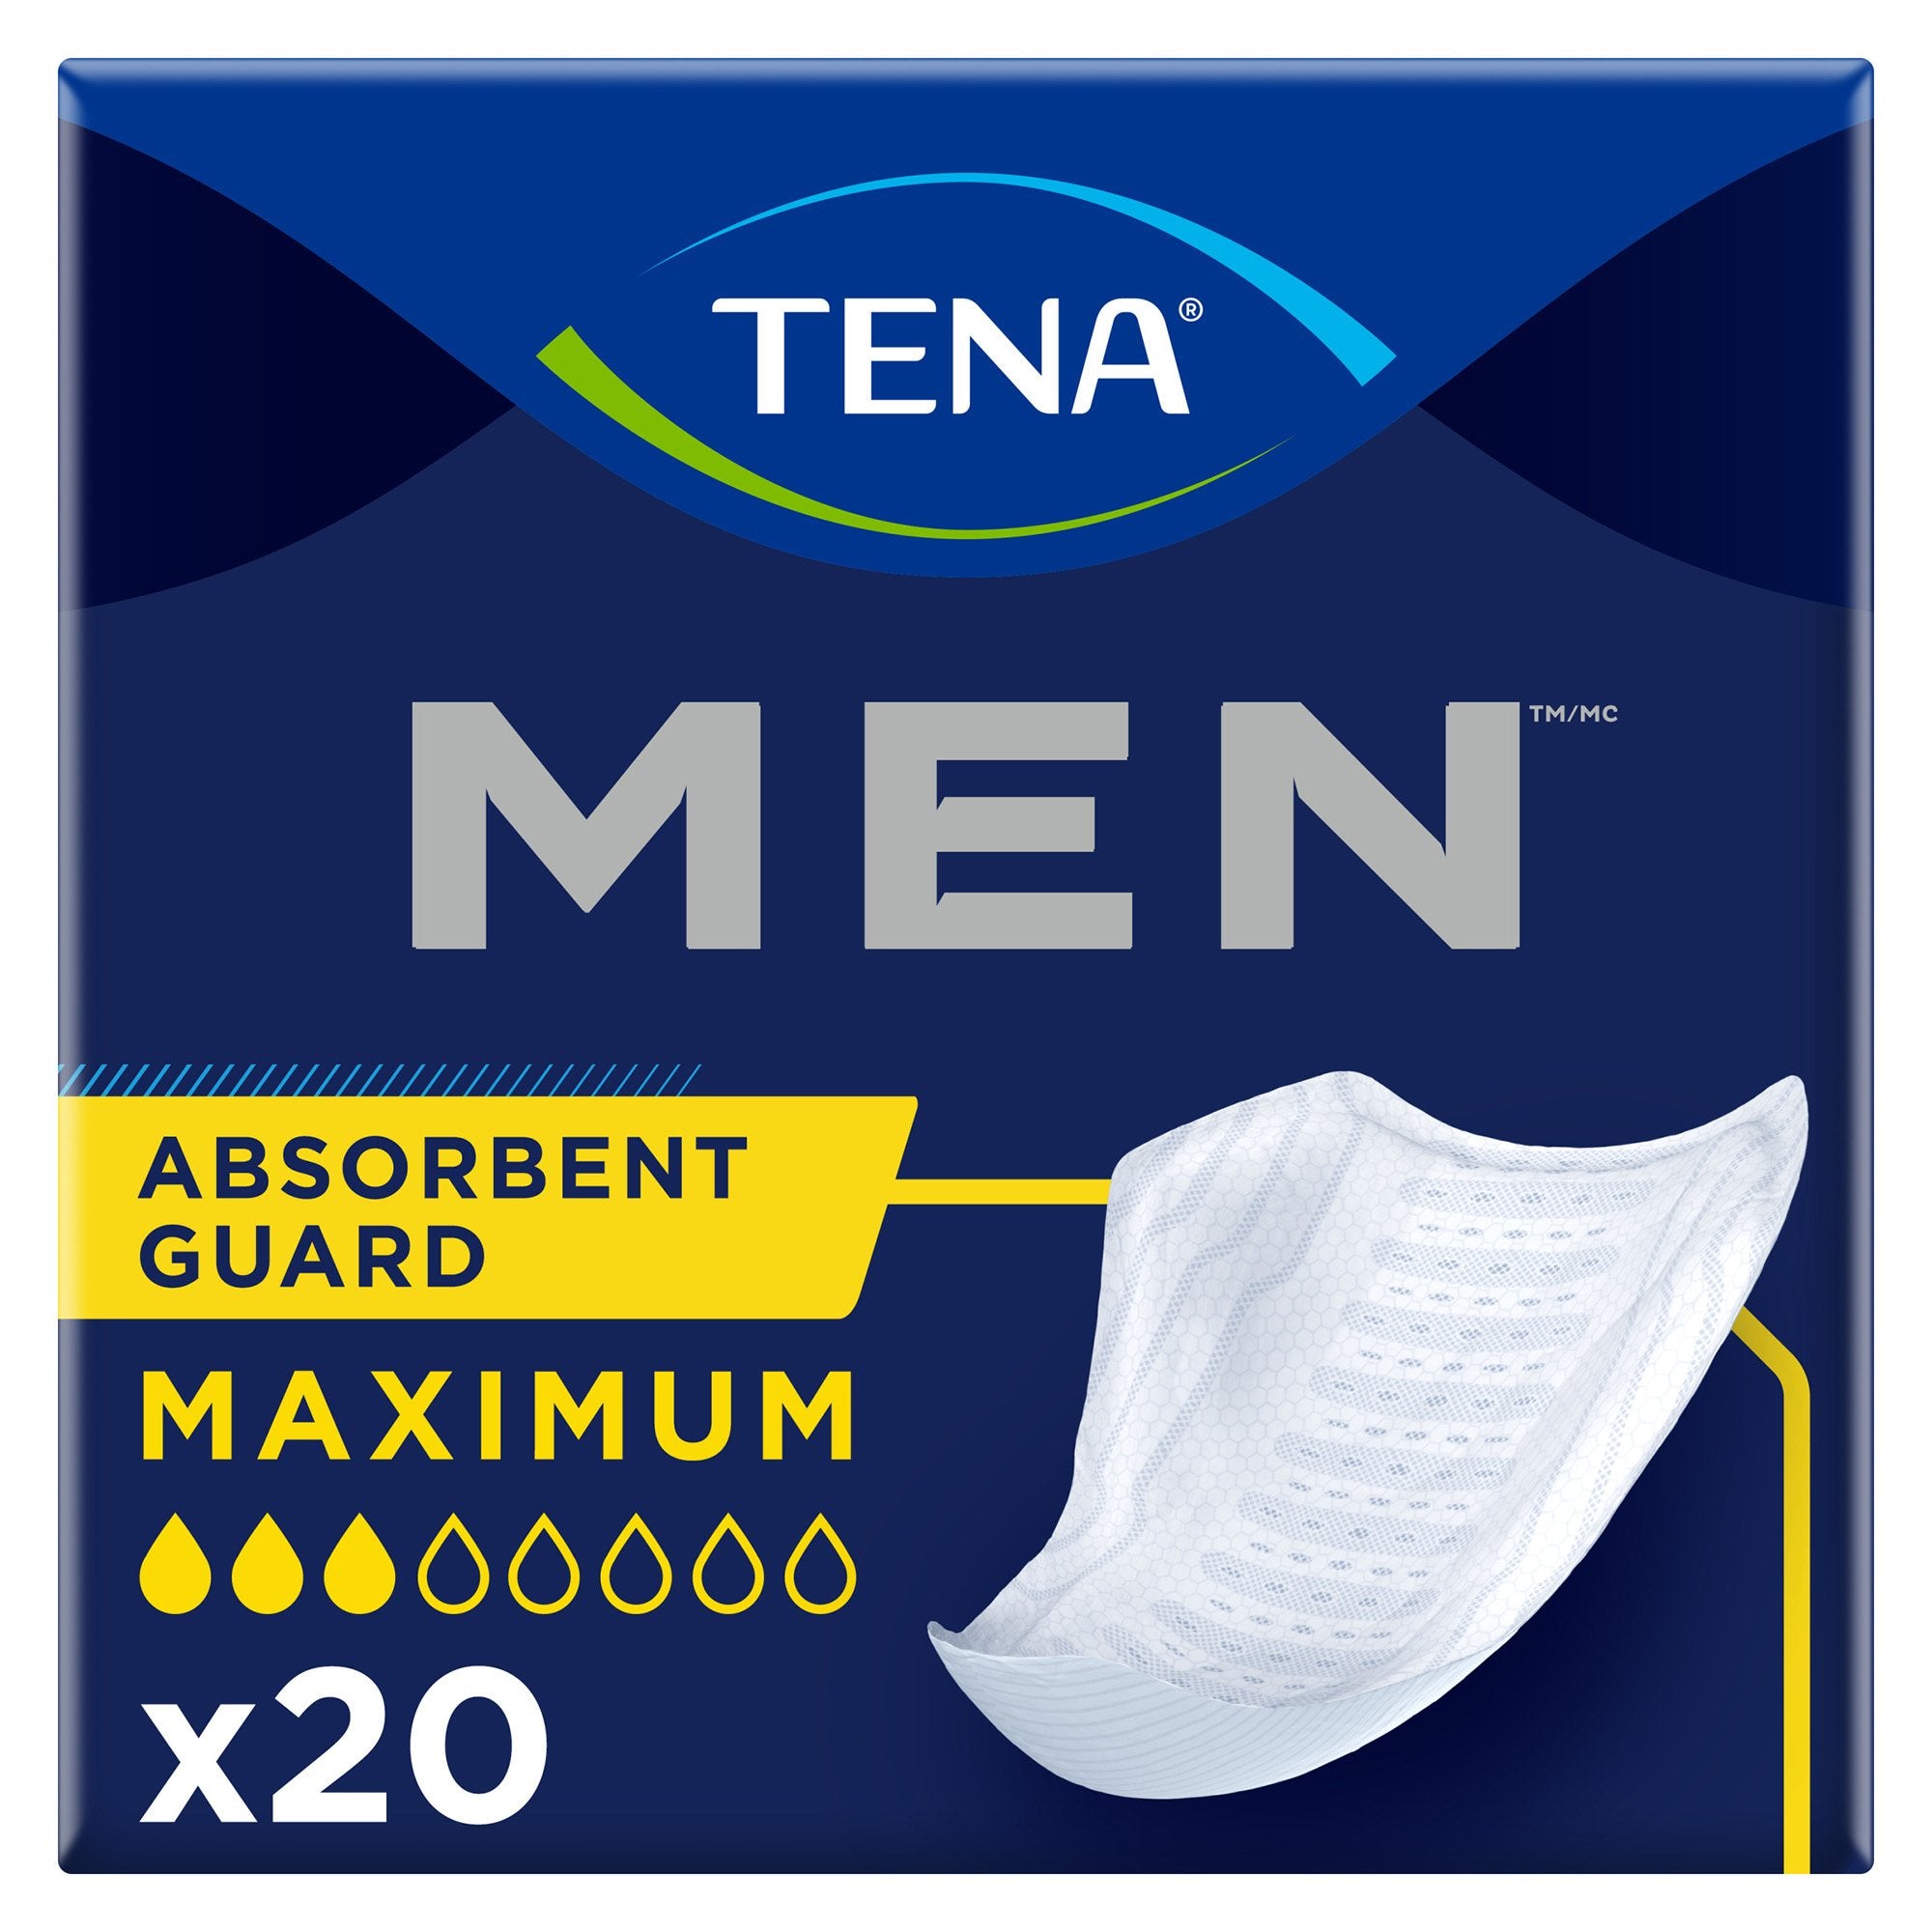 Bladder Control Pad TENA Men Moderate Guard 8 Inch Length Moderate Absorbency Dry-Fast Core One Size Fits Most